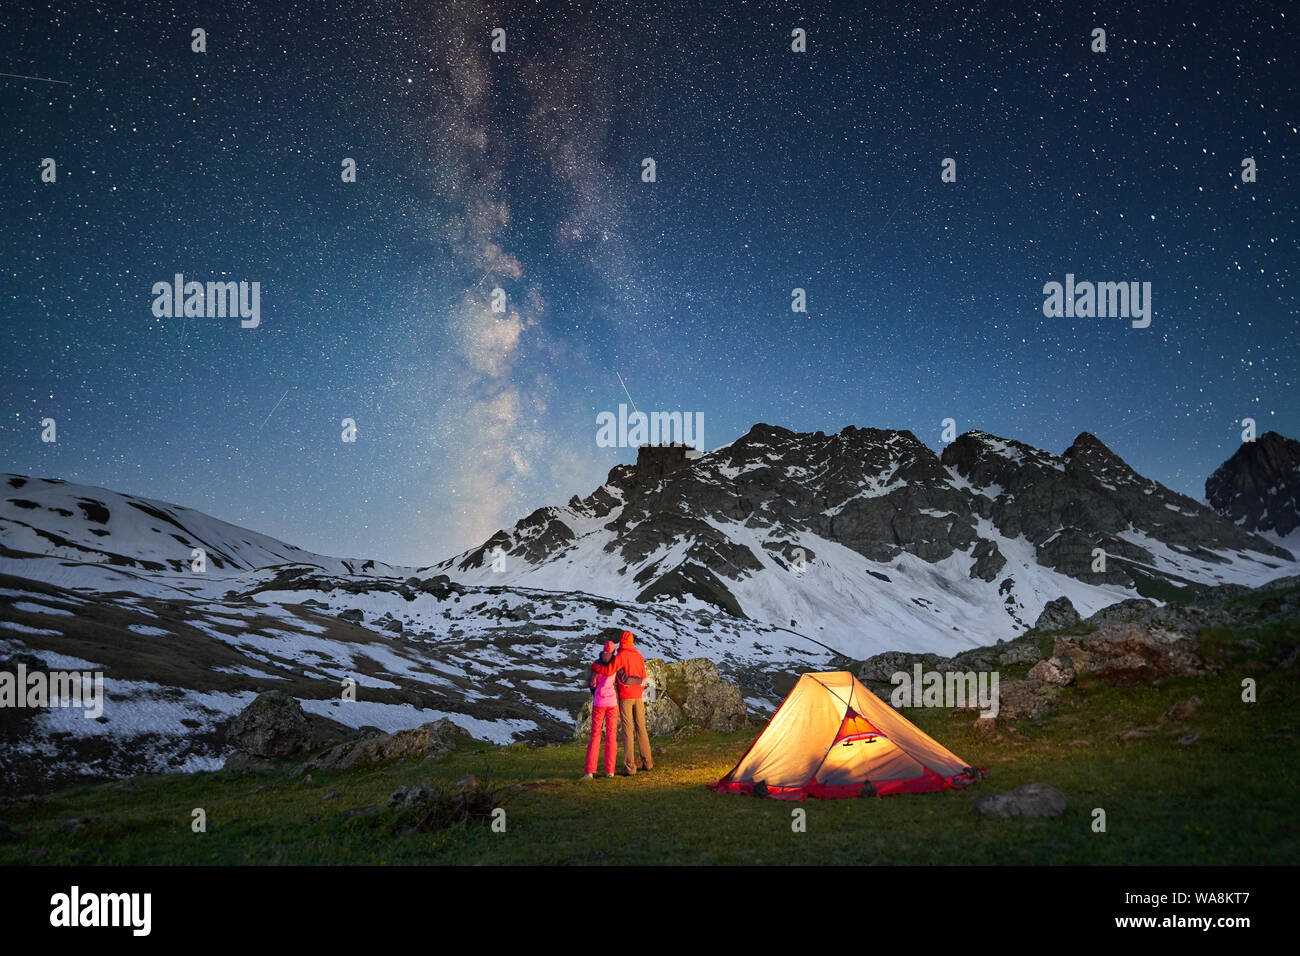 Couple standing near tent and looking at the milky way in mountains at night Stock Photo